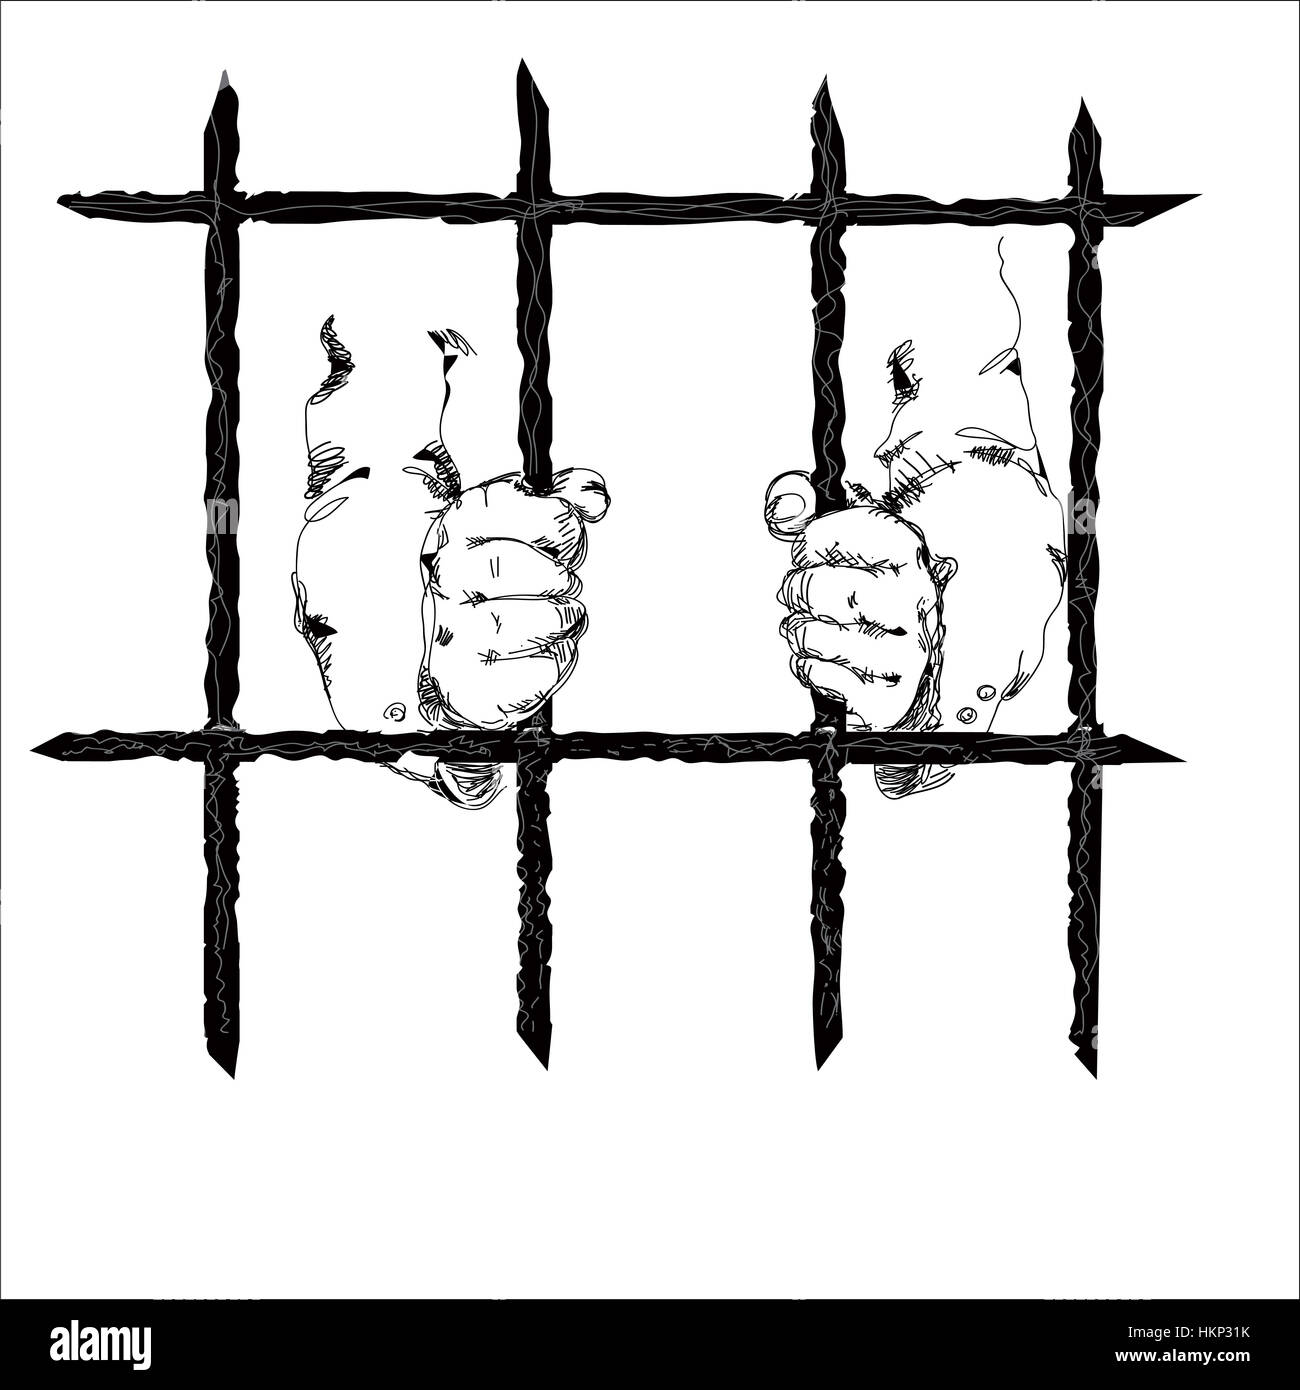 Inmate hands behind the bars, simple illustration in black and white Stock Photo